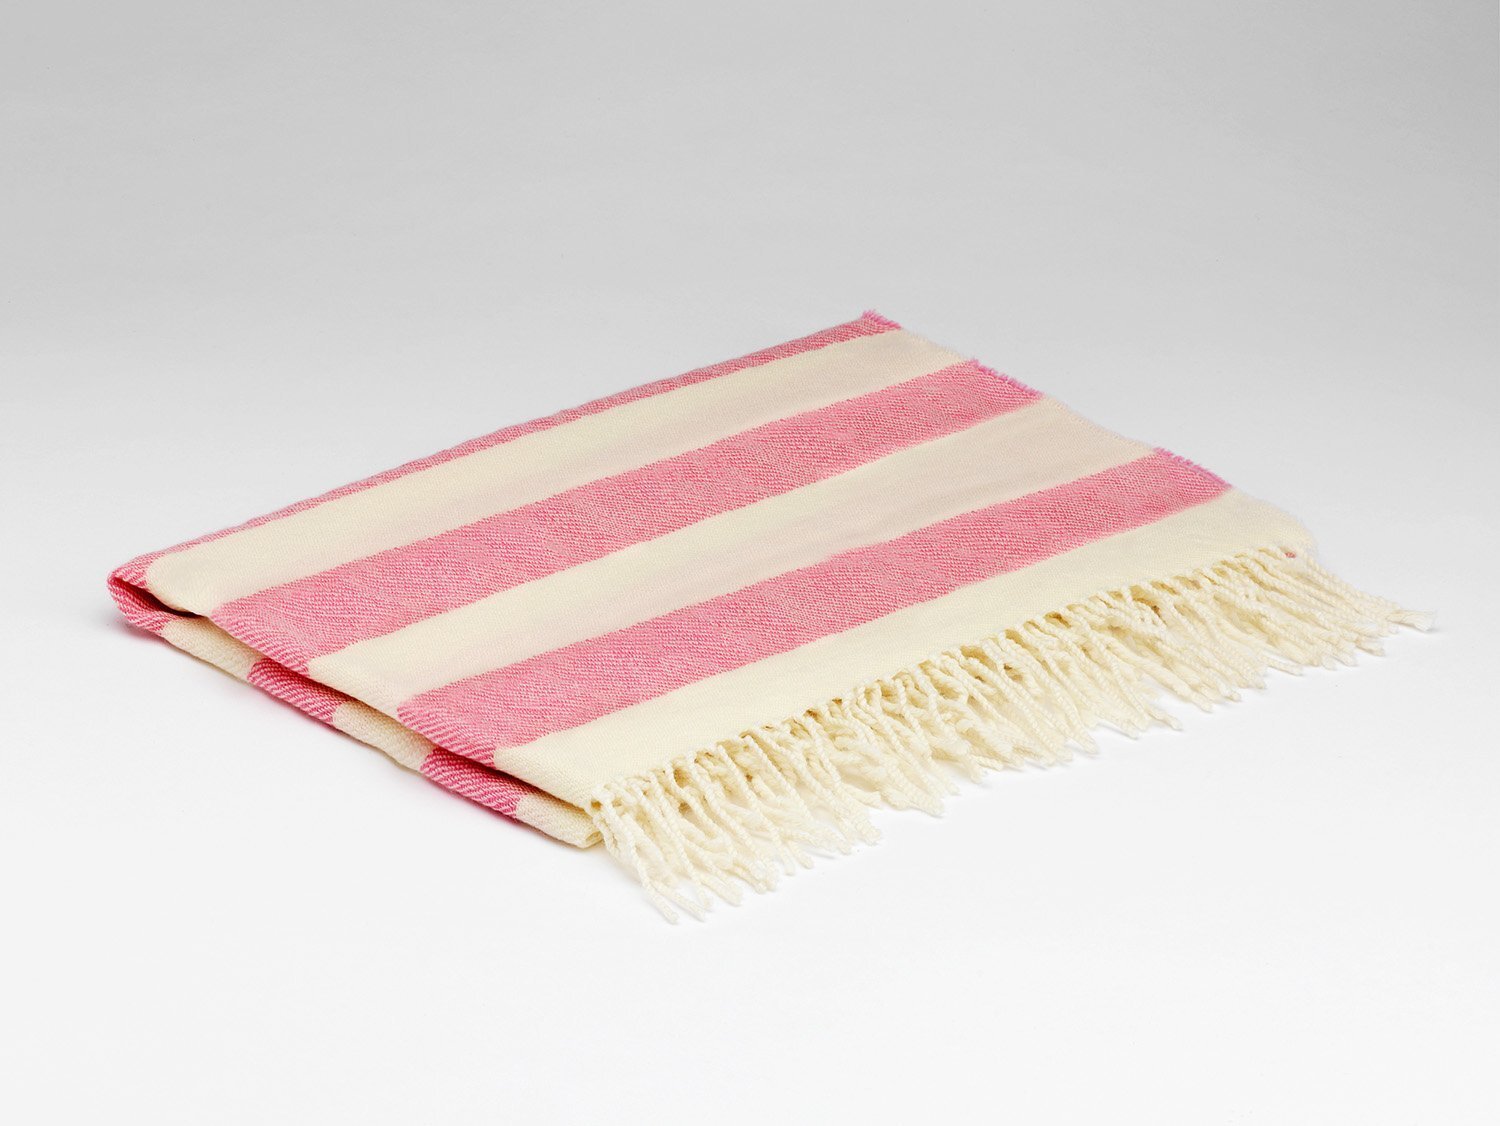 McNutt of Donegal | Lambswool Baby Blanket - Pink